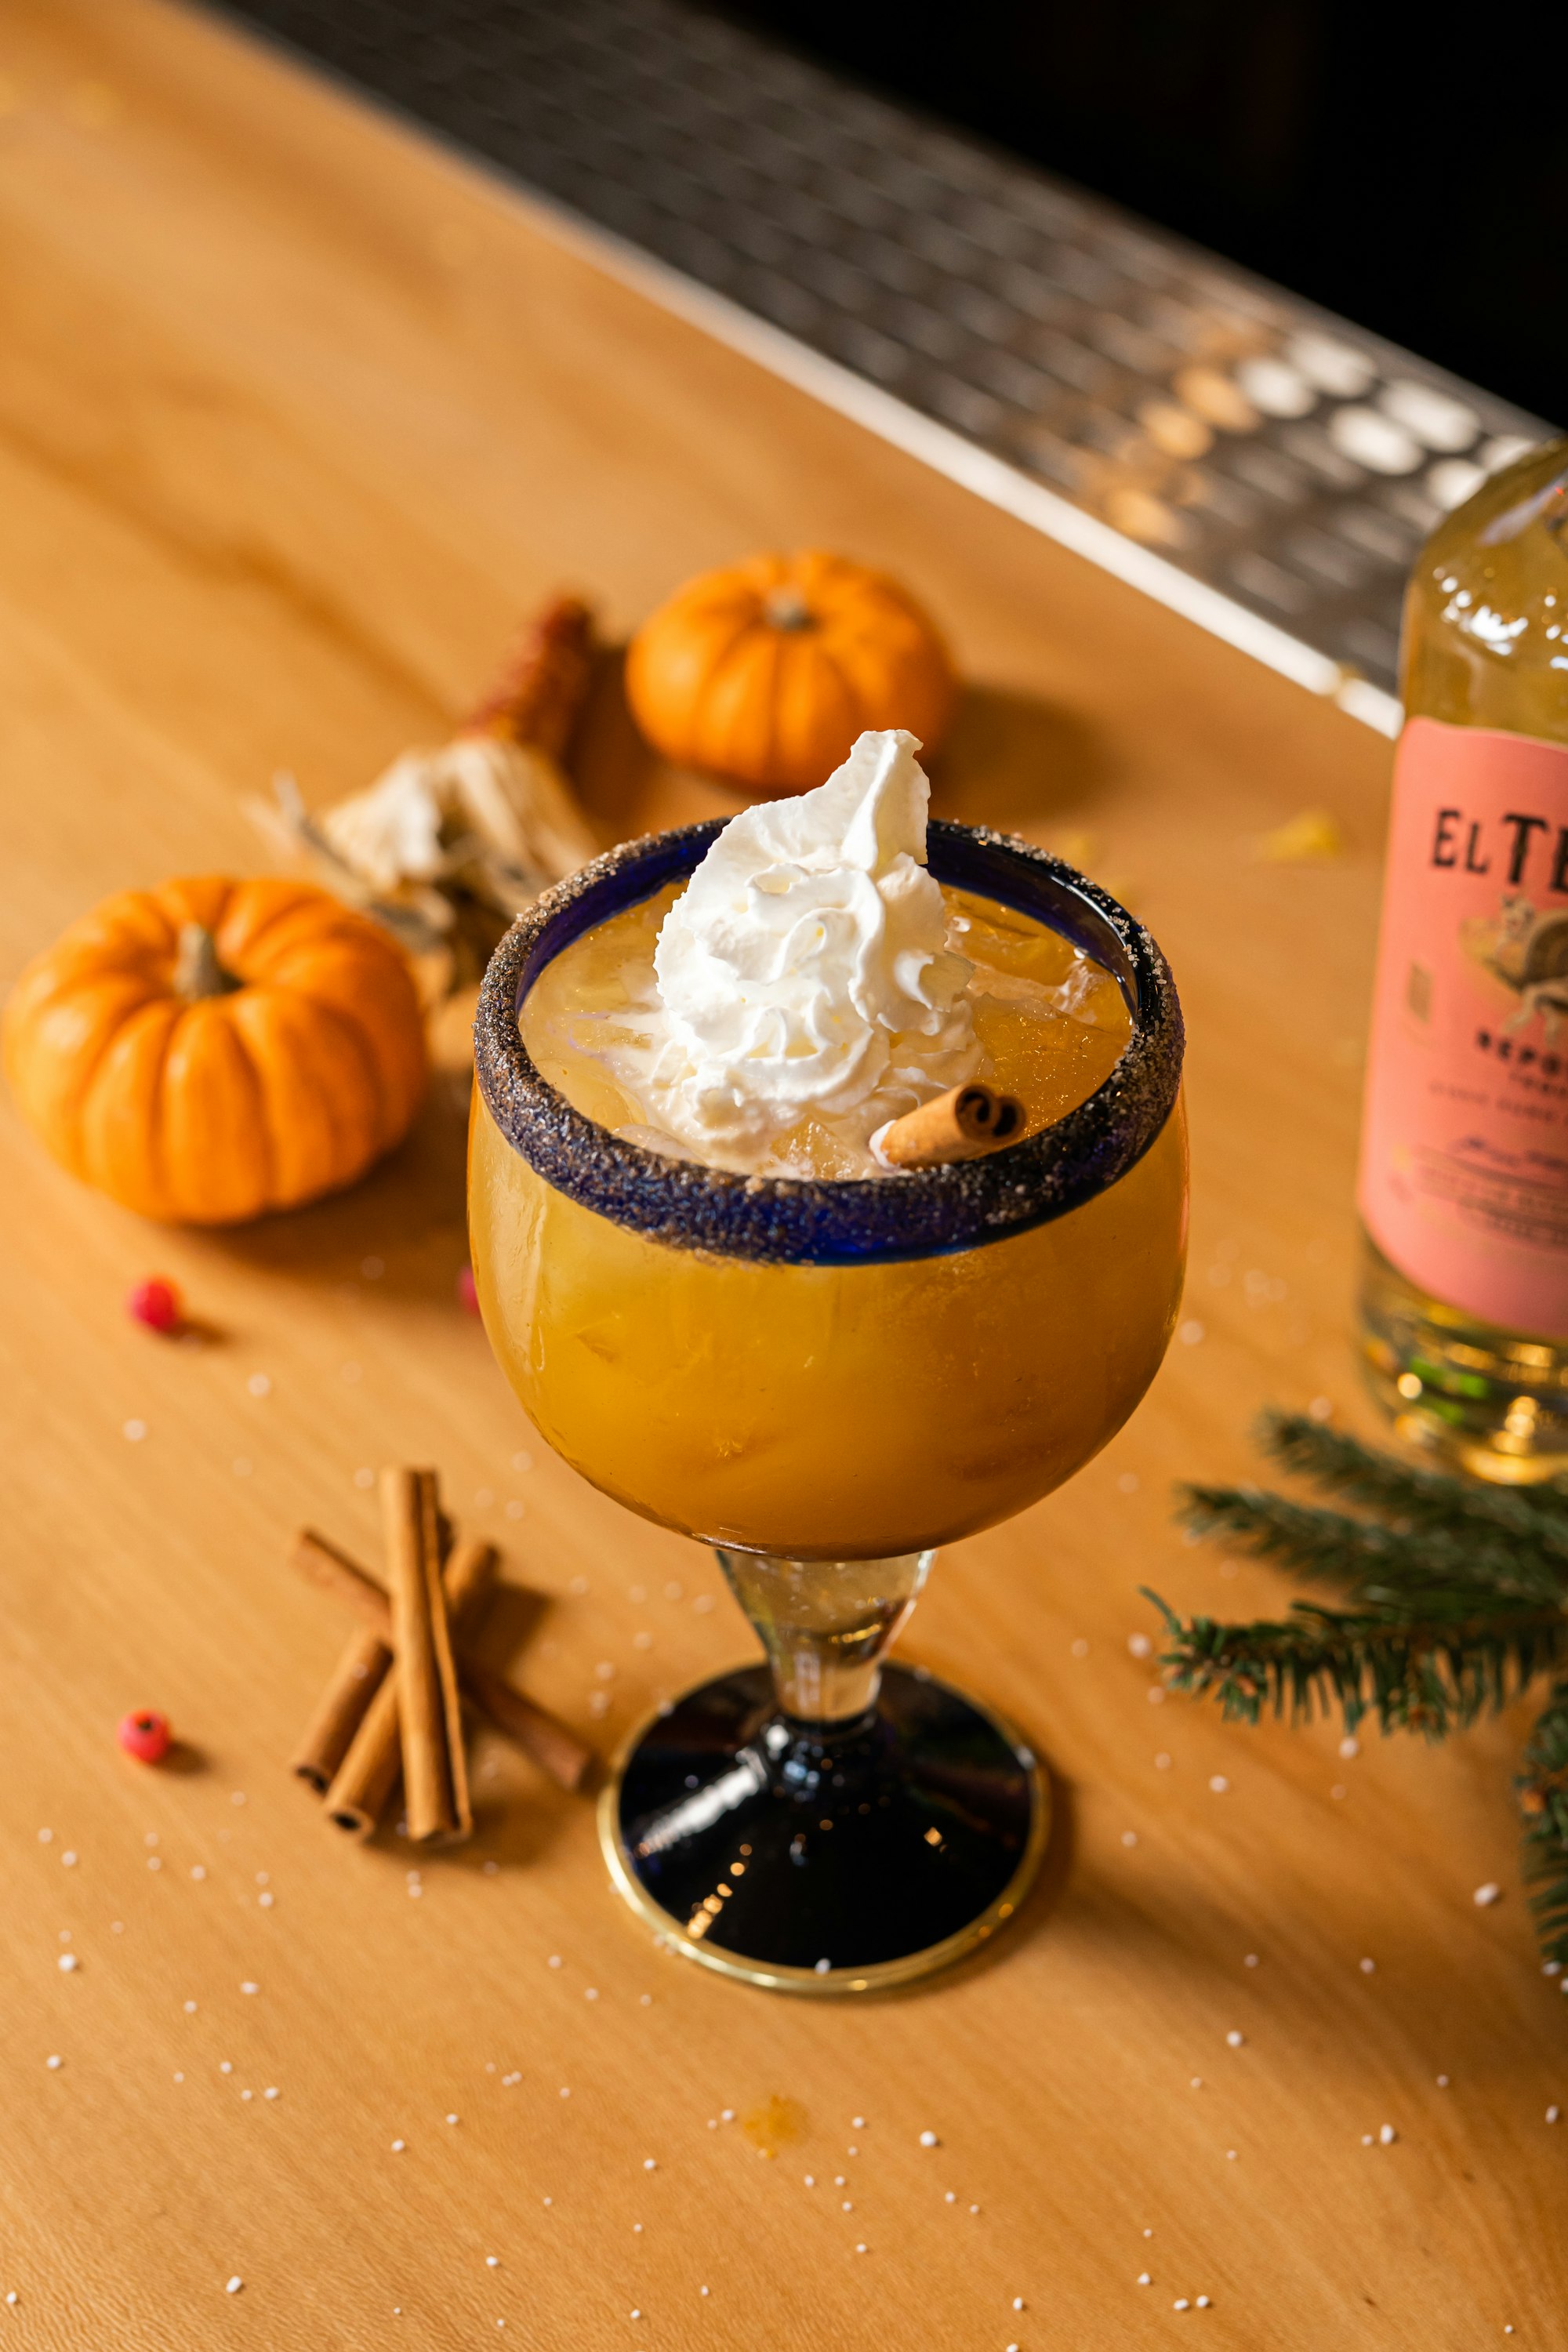 Pumpkin flavors can even work with some alcoholic beverages.